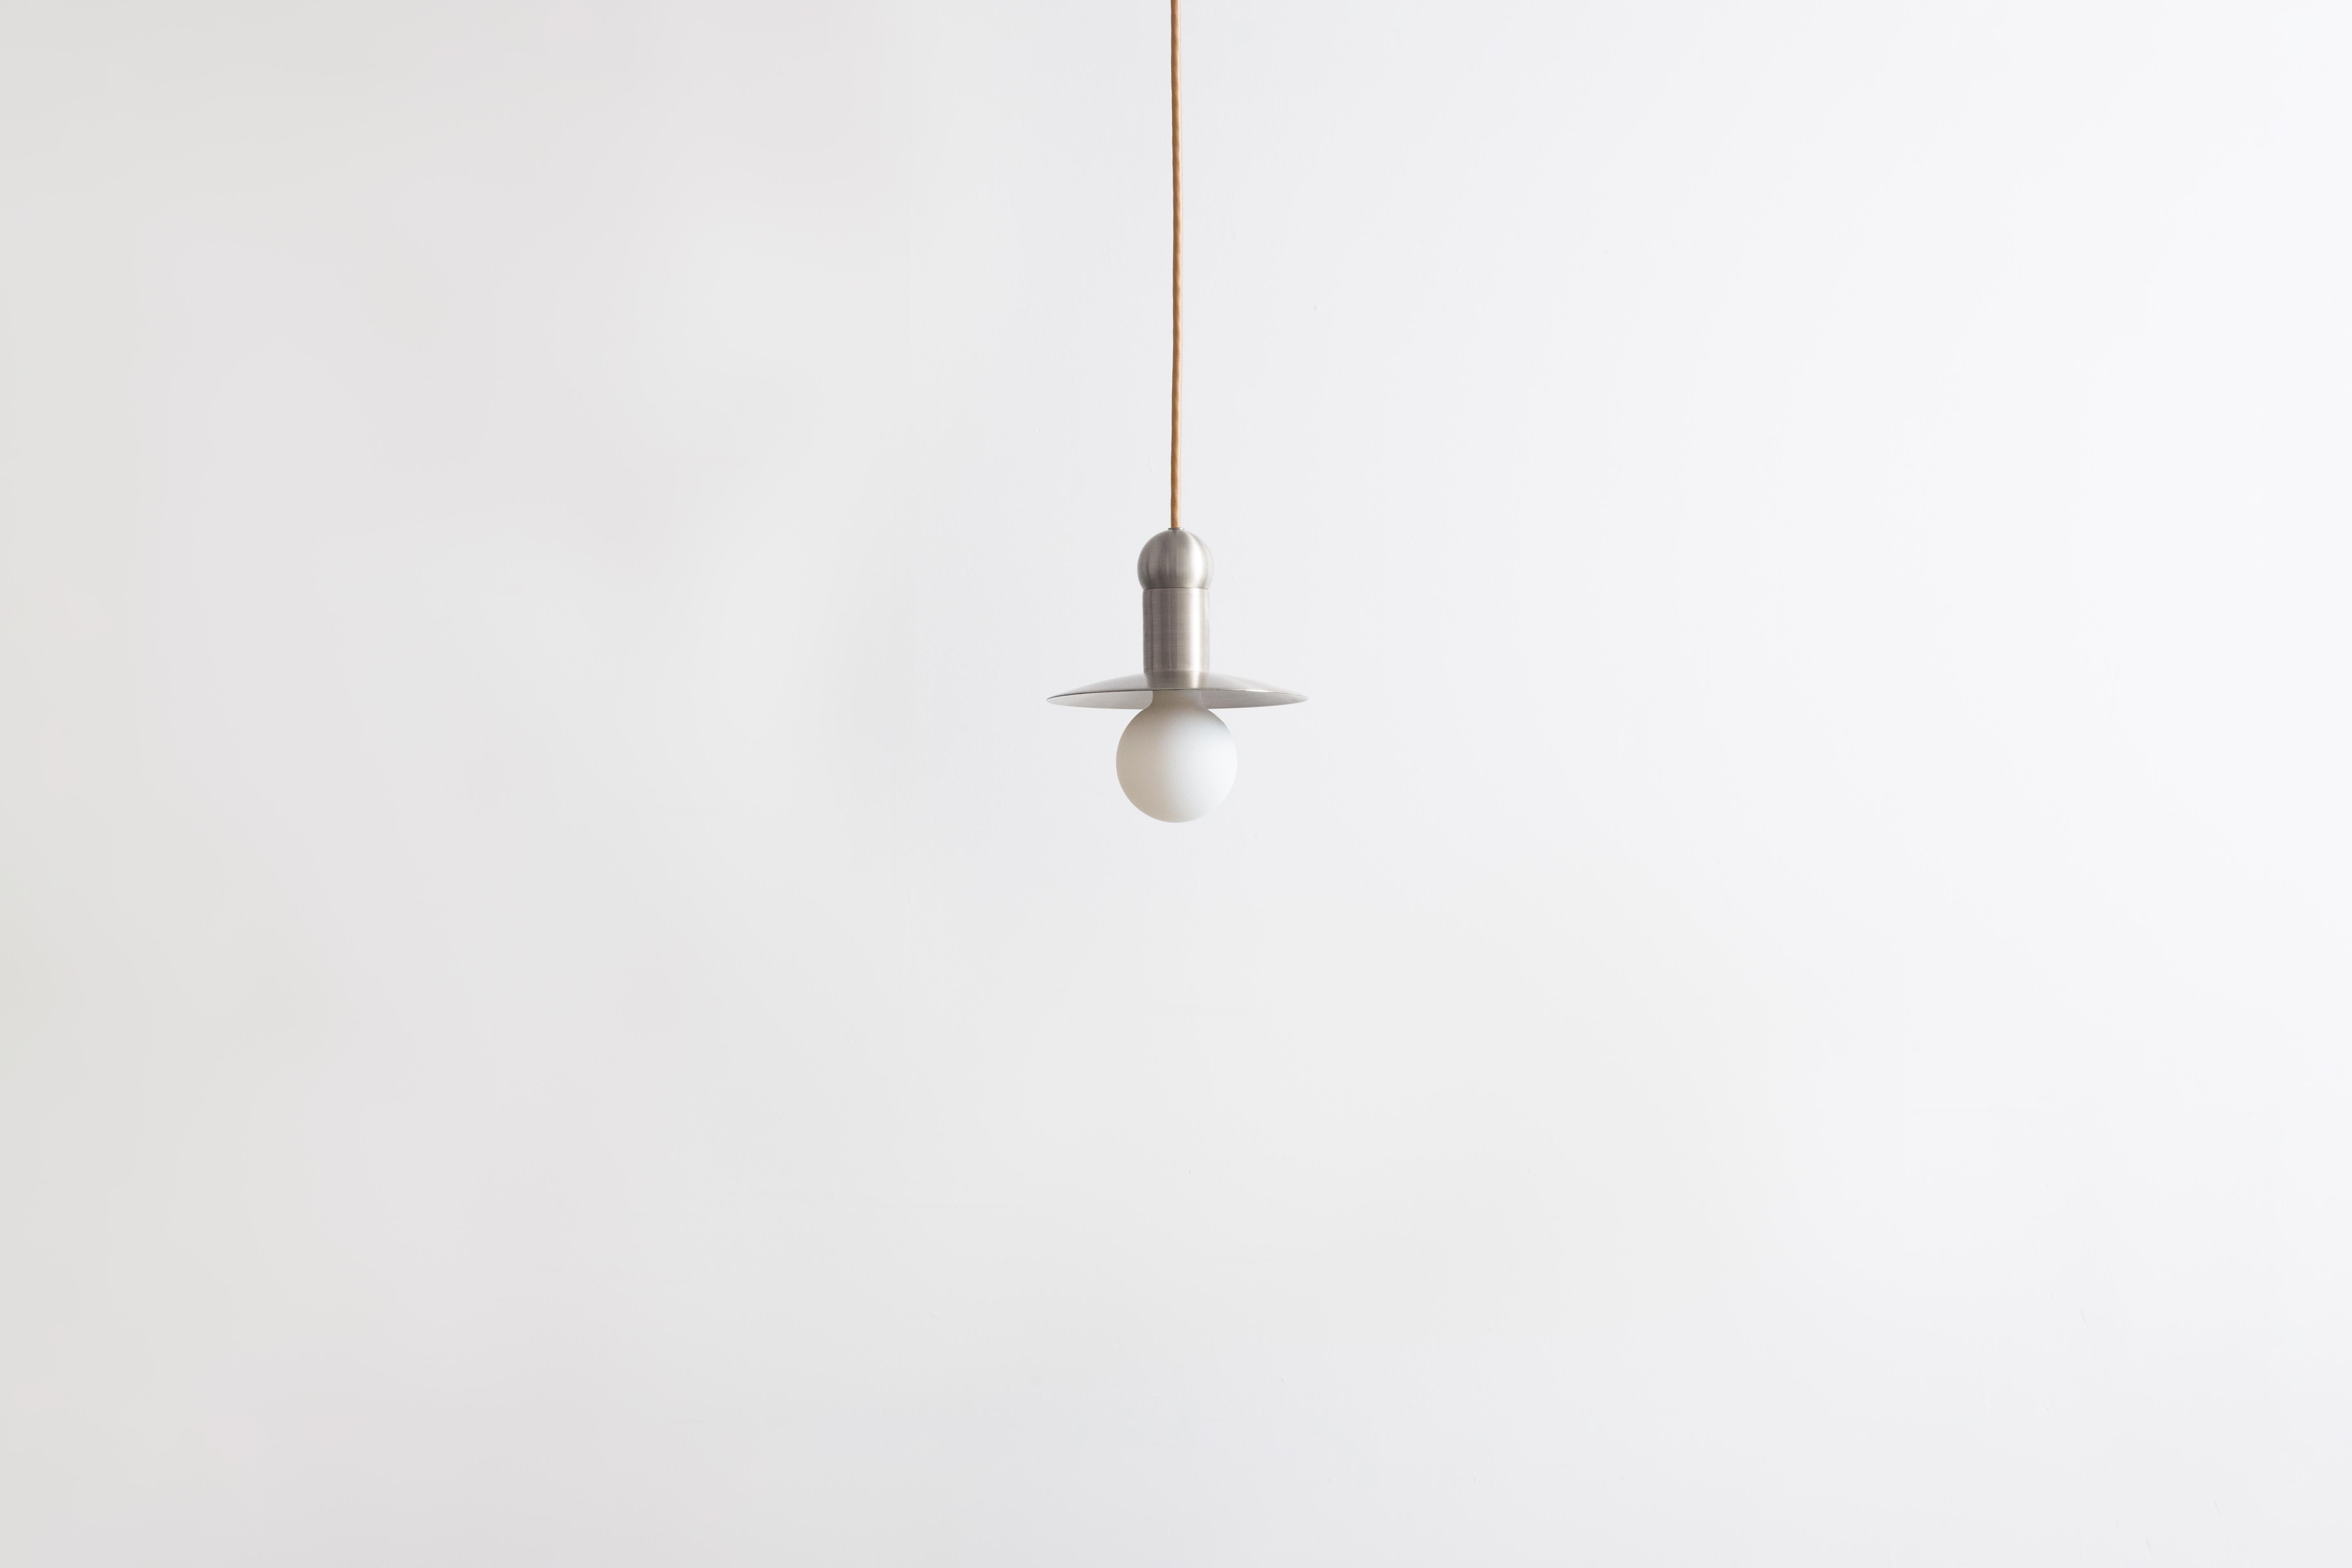 The orbit cord pendant positions a single glowing bulb against a stationary radiant dish, exploring the scale and illumination of an early American candle via the form of a traditional down-light pendant. With rotund details, each pendant provides a